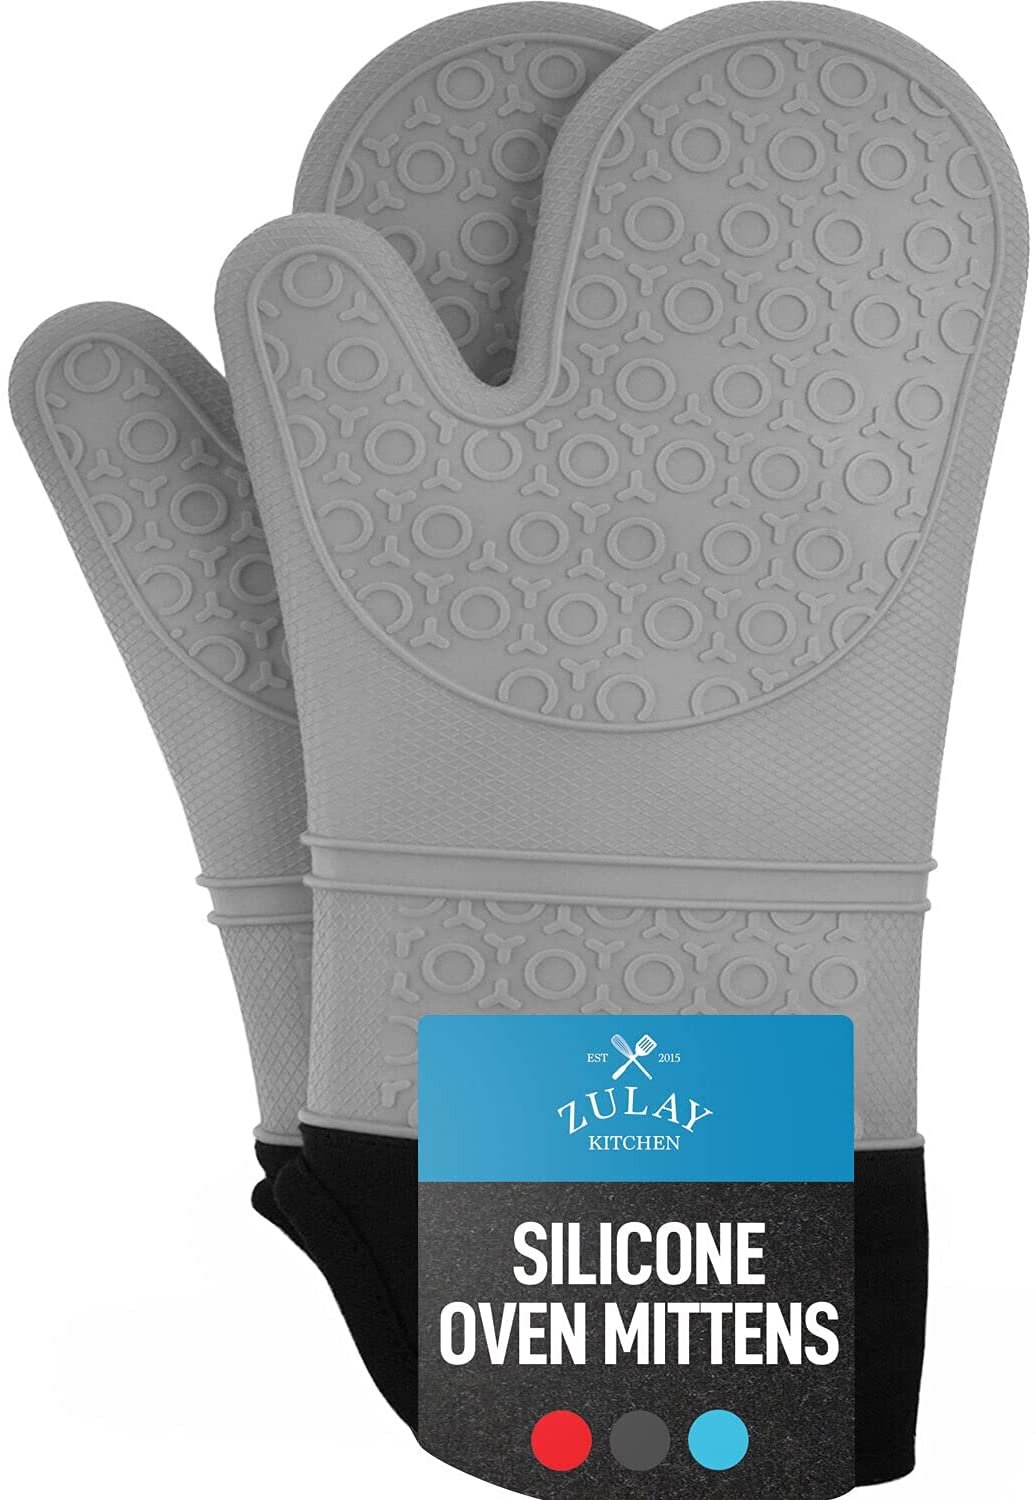 Nautica Home Aqua Striped 100% Cotton Oven Mitts with Silicone Palm (Set of 2)